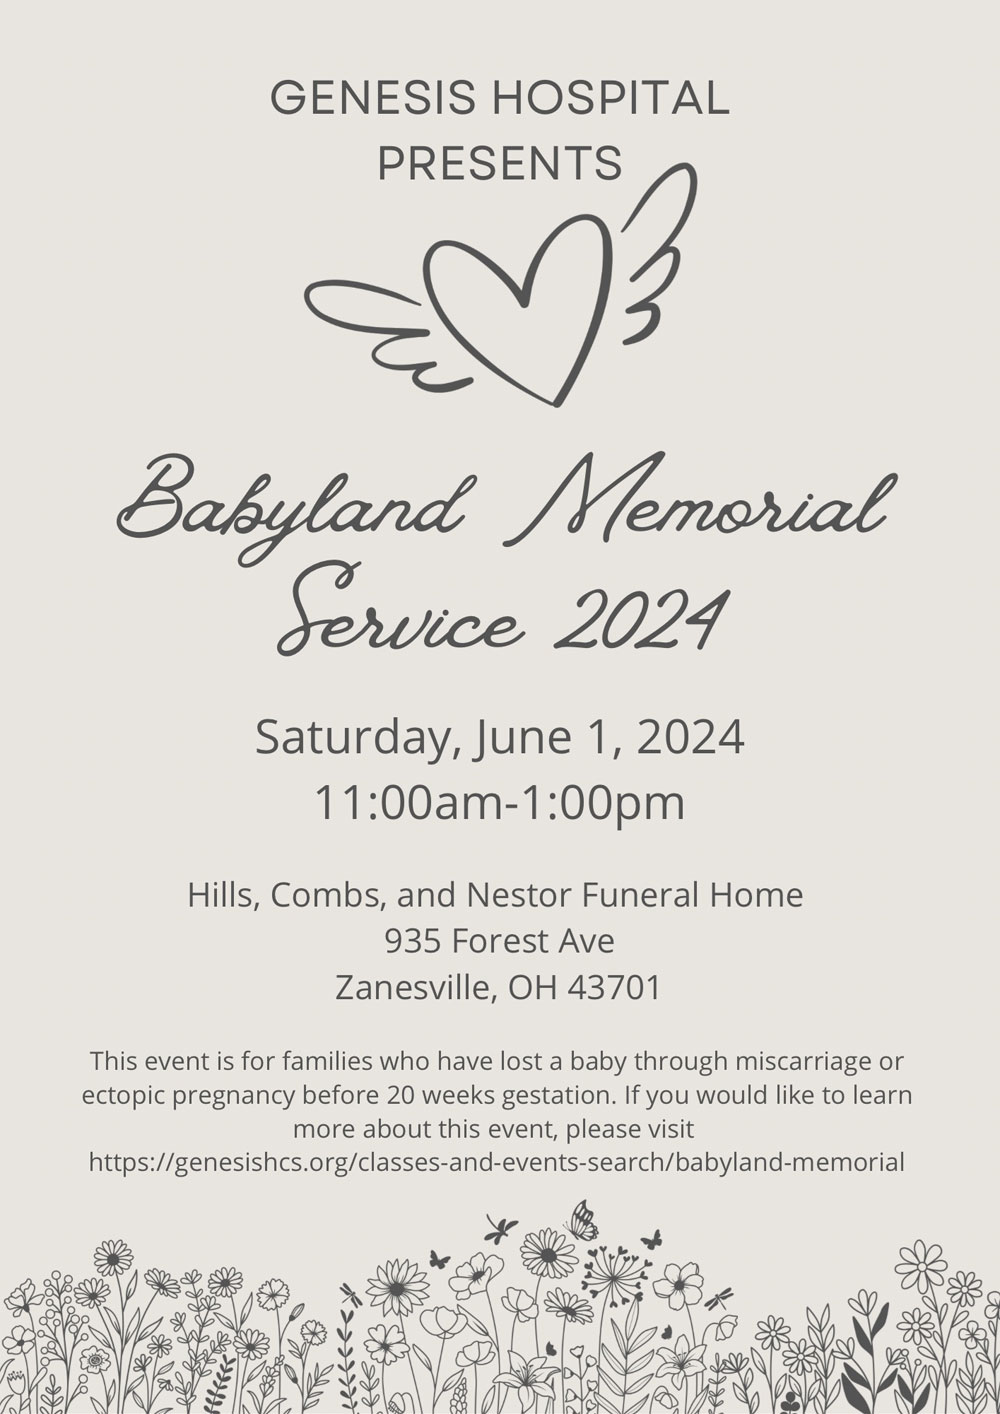 Babyland Memorial Service - This event is for families who have lost a baby through miscarriage or ectopic pregnancy before 20 weeks gestation. I fyou would like to learn more about this event please visit the link below.